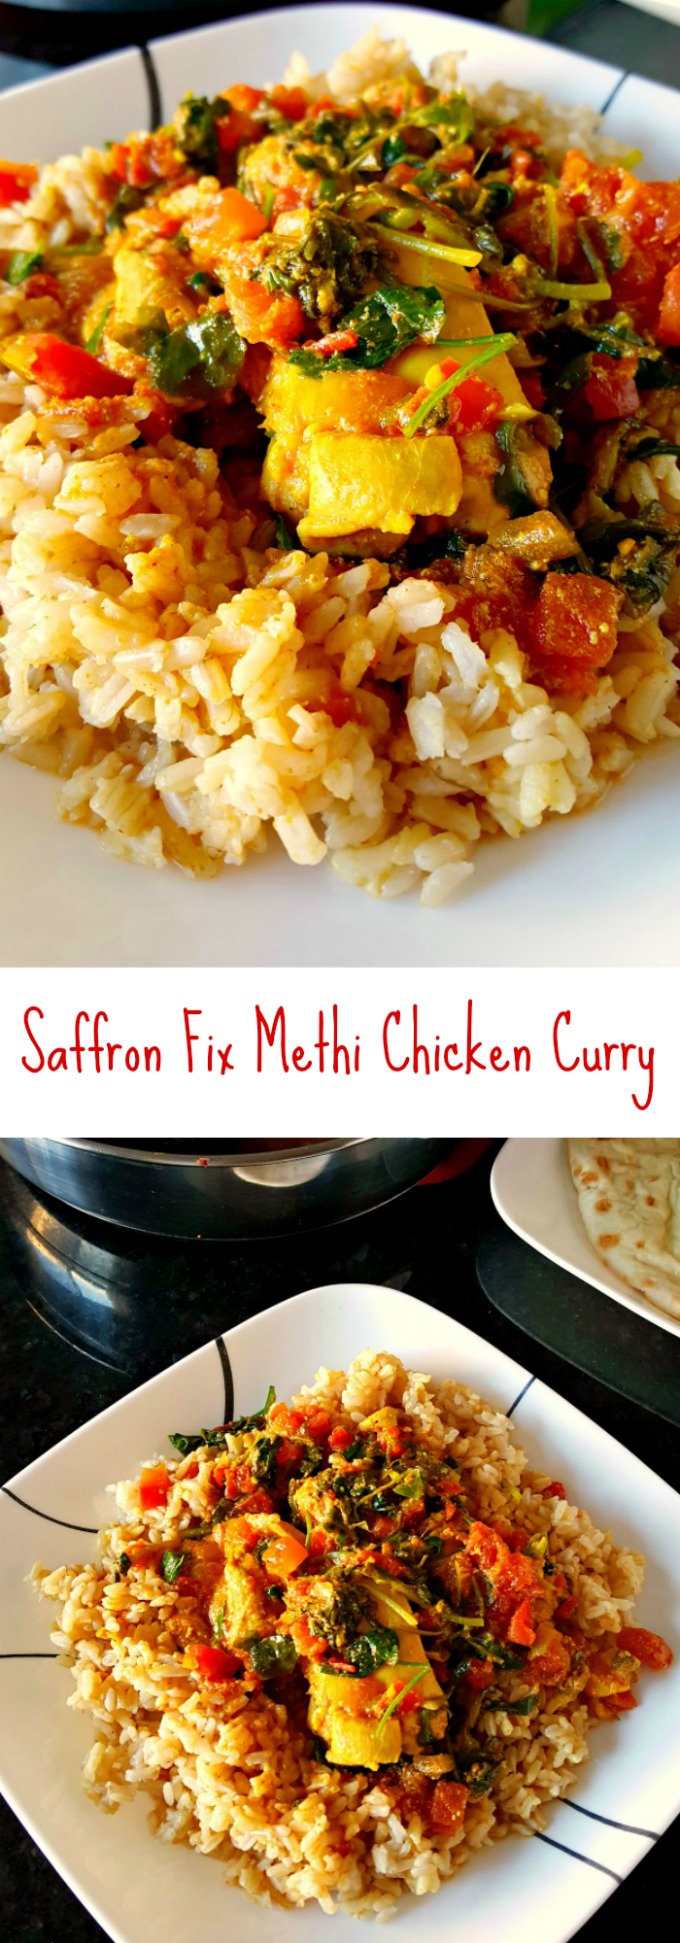 Saffron Fix satisfies my need for an Indian fix! This meal subscription service is unique, delicious, and on the table in 30 minutes. @AKitchenHoor @saffronfix